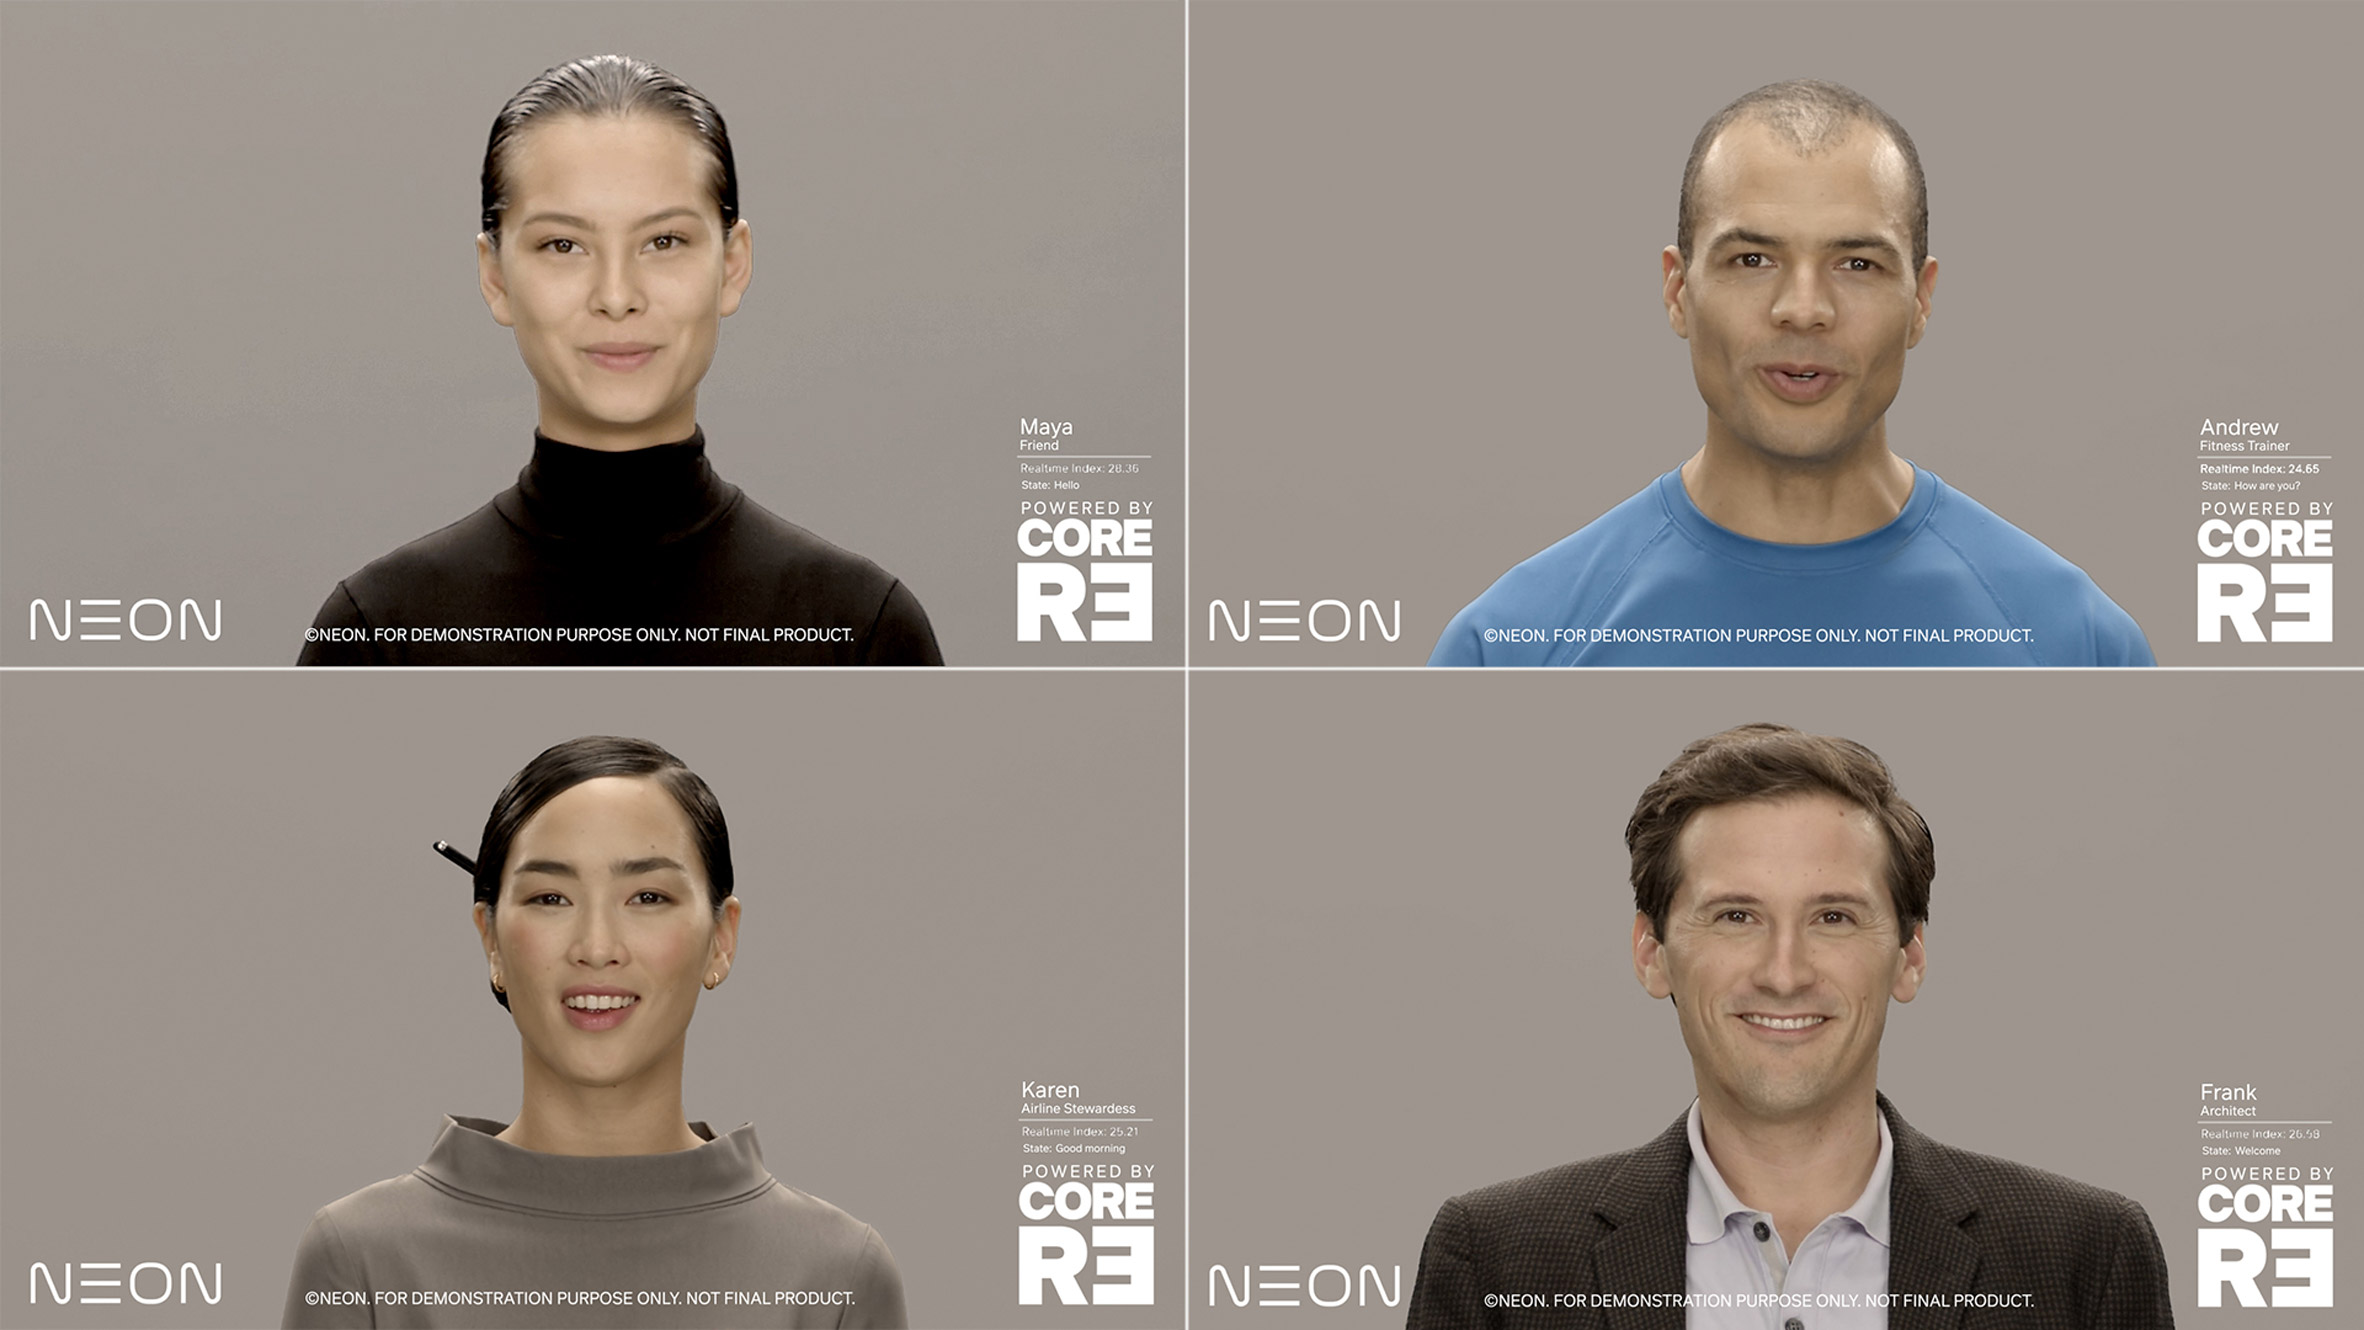 Samsung's artificial Neon humans are "a new kind of life"